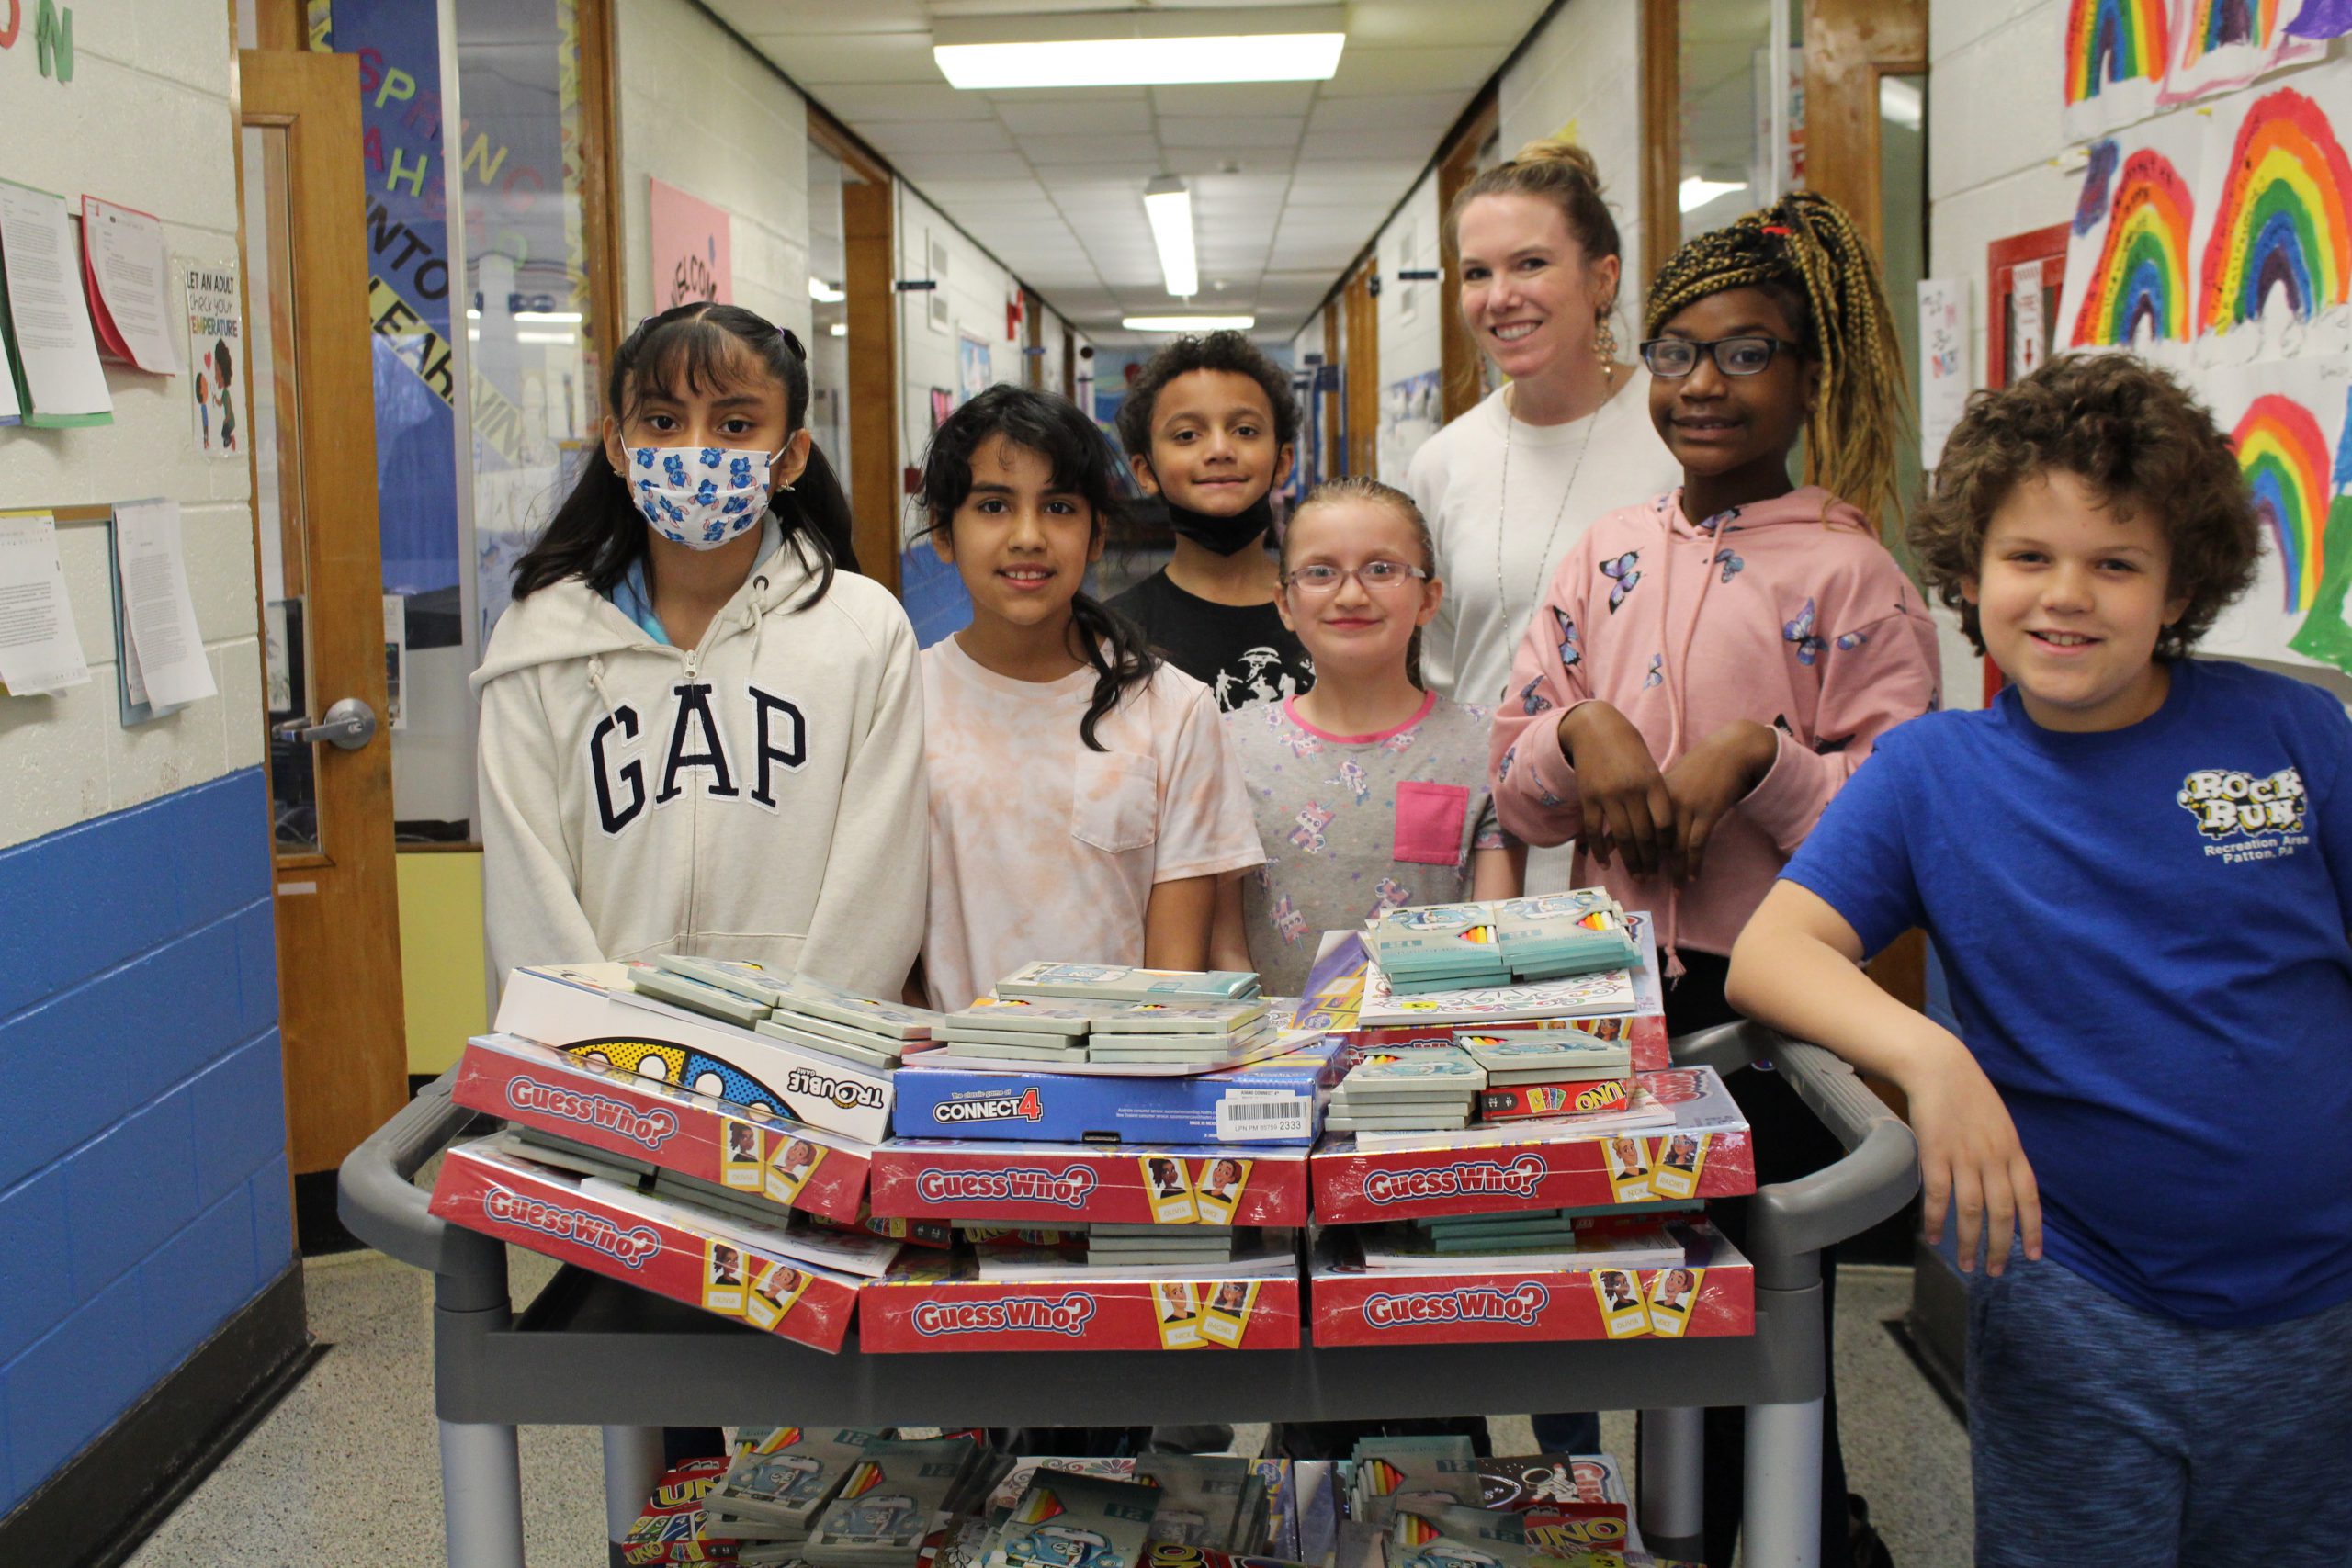 Monticello students and a Monticello staff member are standing in a hallway in front of a cart filled with board games. Everyone is standing together and smiling for a picture.